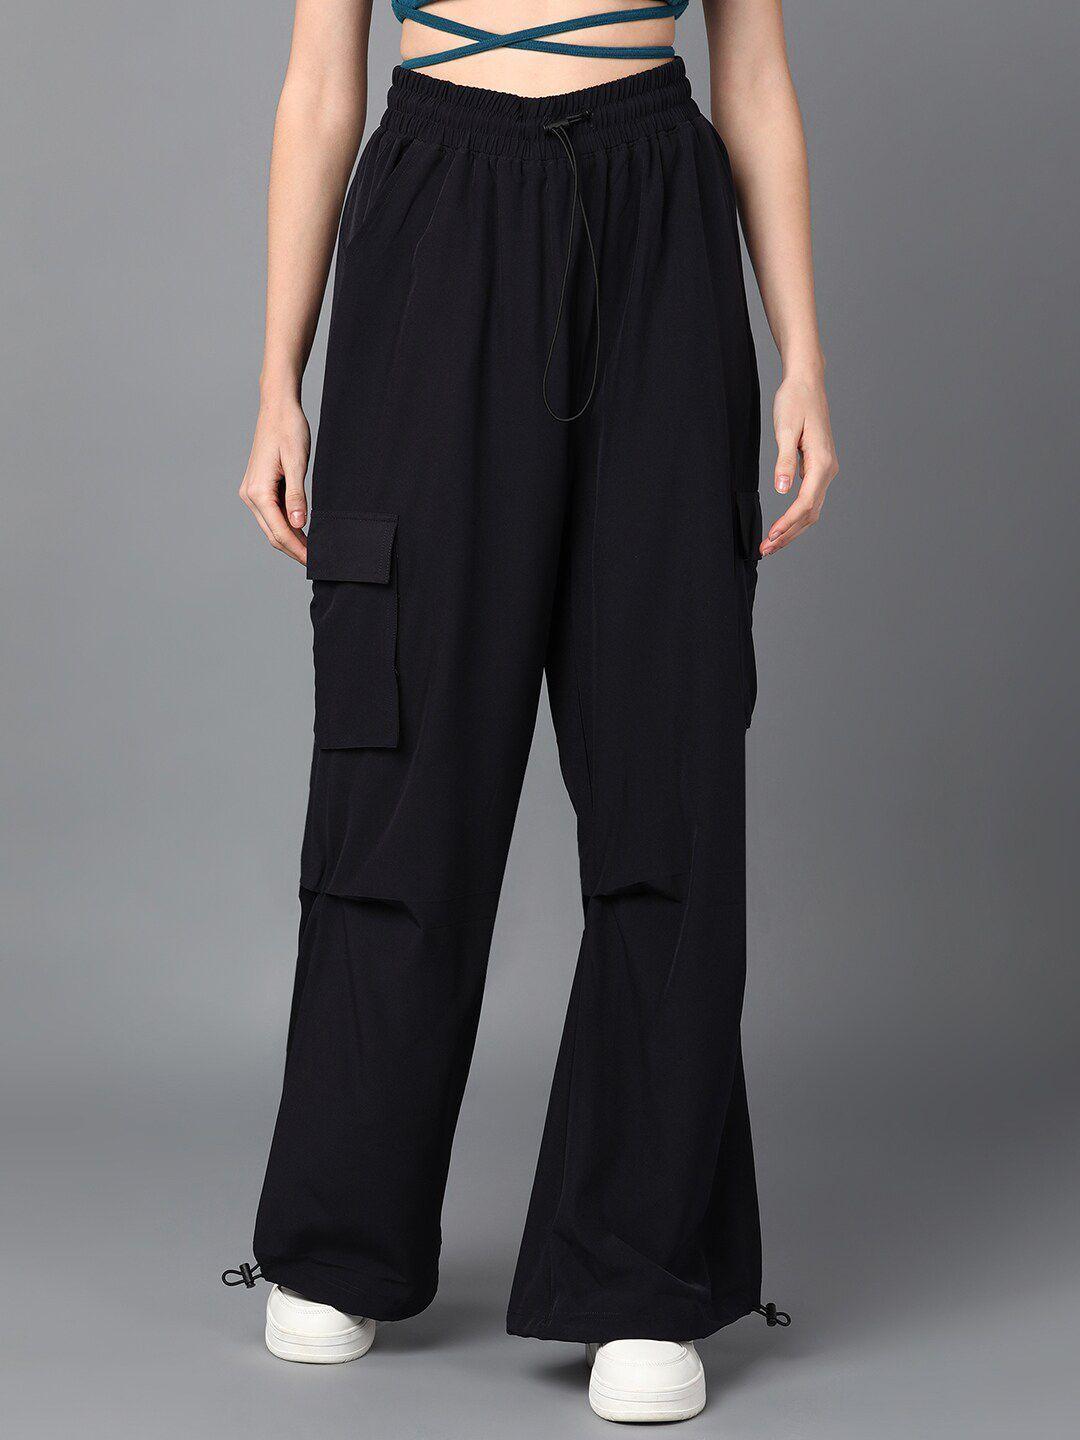 roadster-women-straight-fit-rapid-dry-track-pants